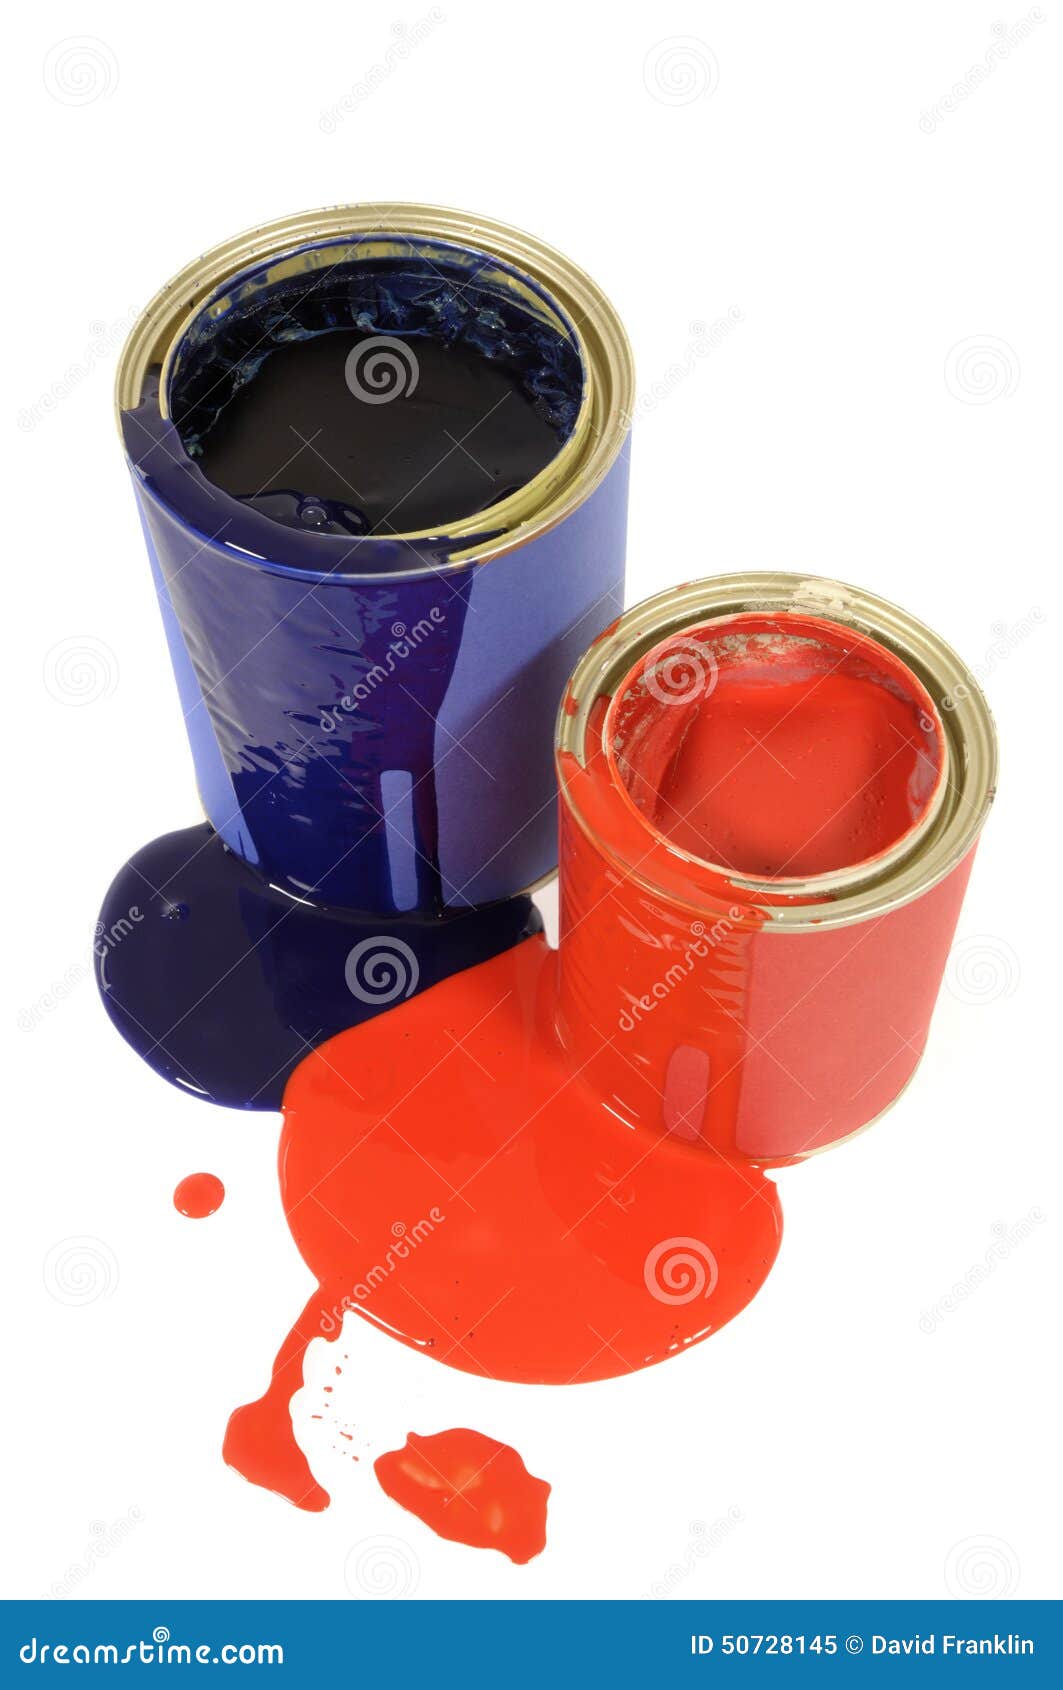 Messy Untidy Paint Cans with Spilled Paint Dripping, Isolated on